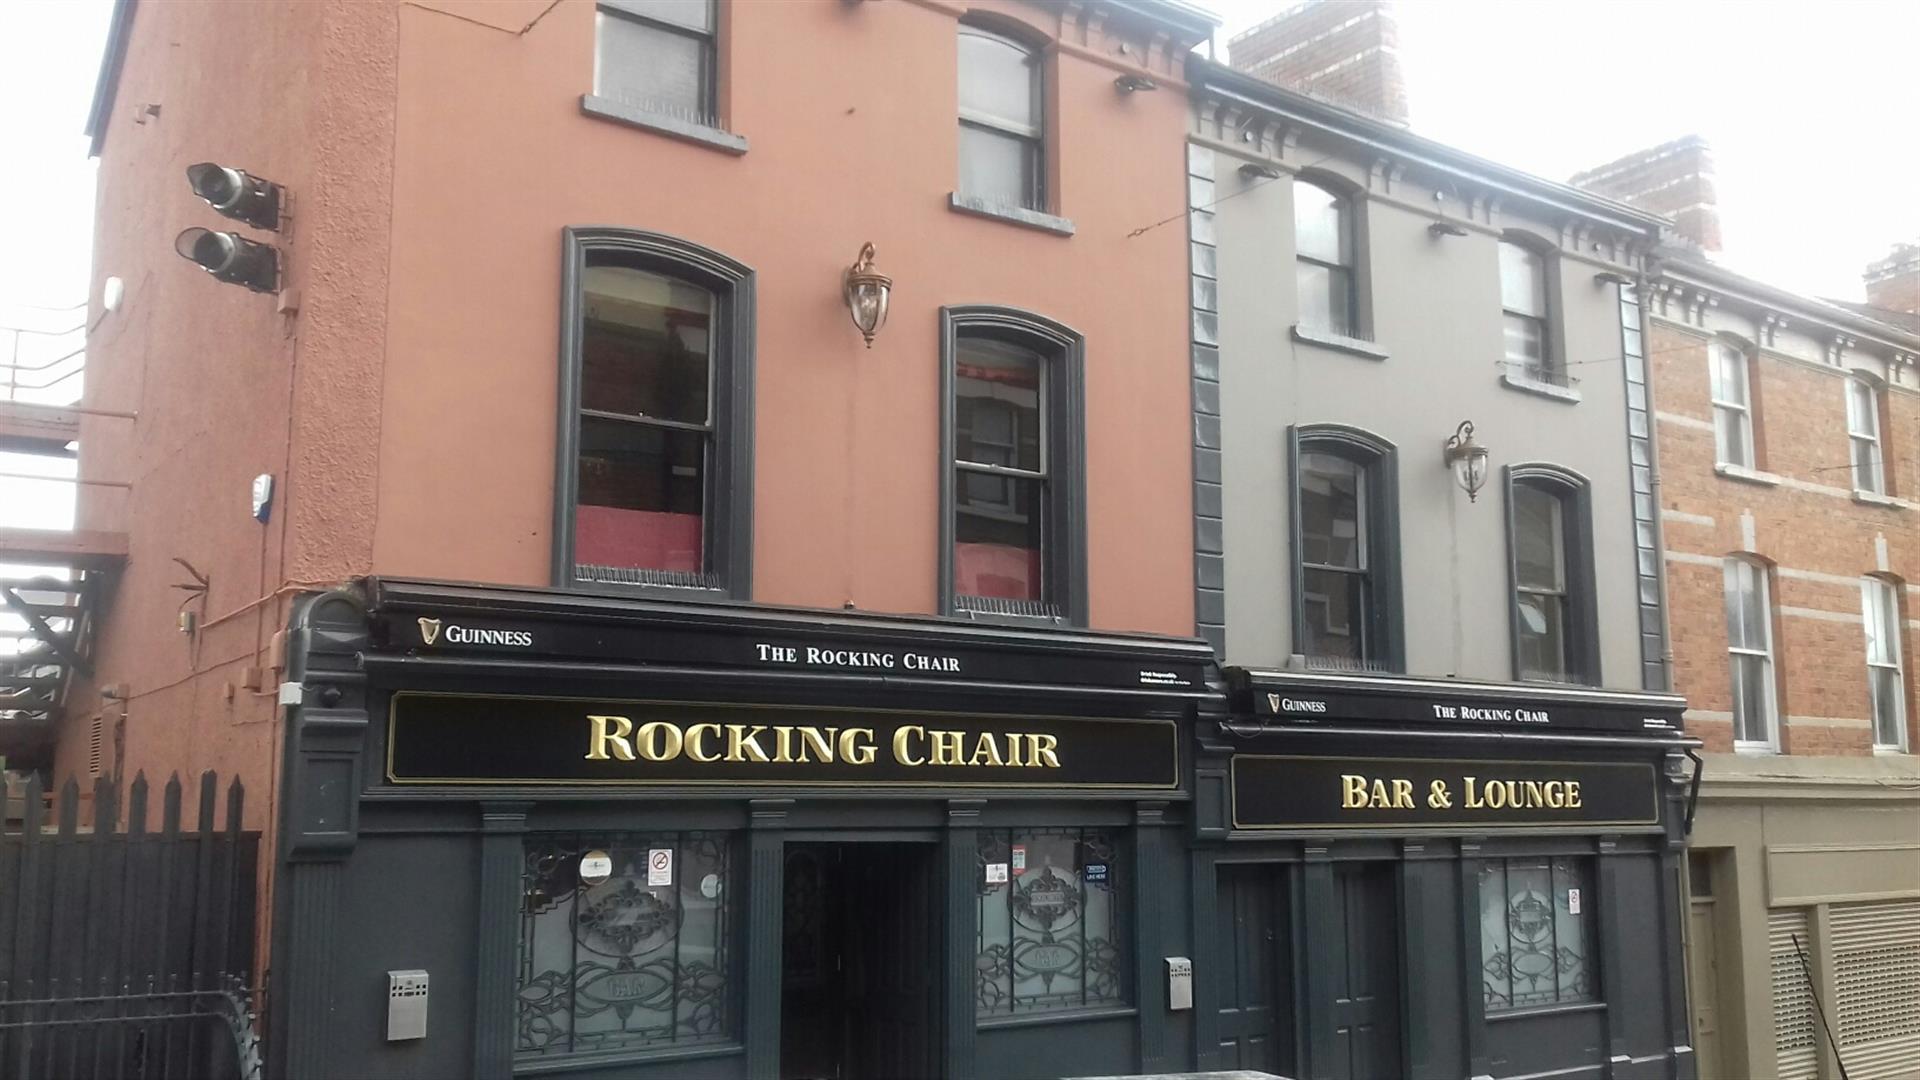 Rocking Chair Bar - in Derry, Londonderry/Derry - Discover Northern Ireland